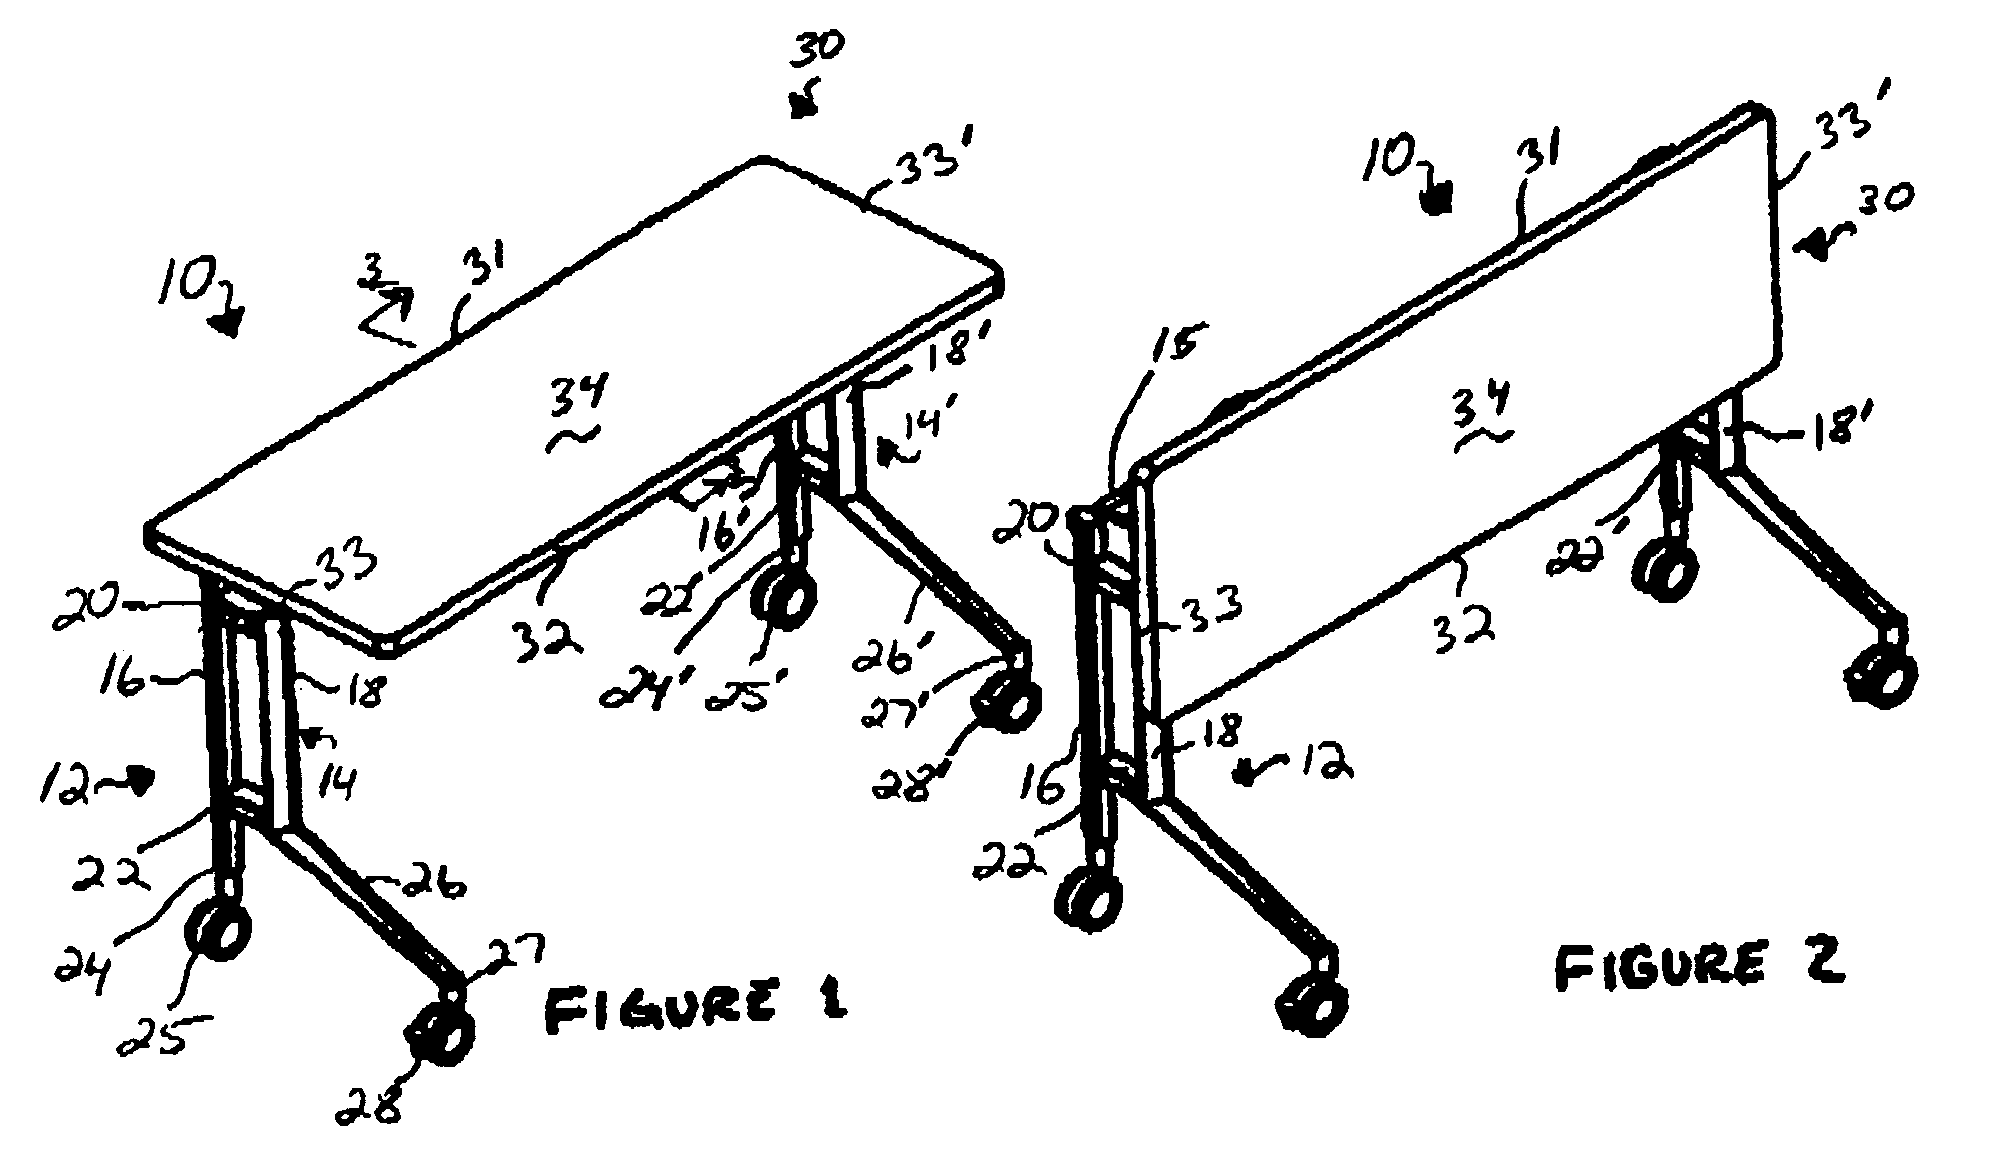 Nesting table with controlled pivoting movement